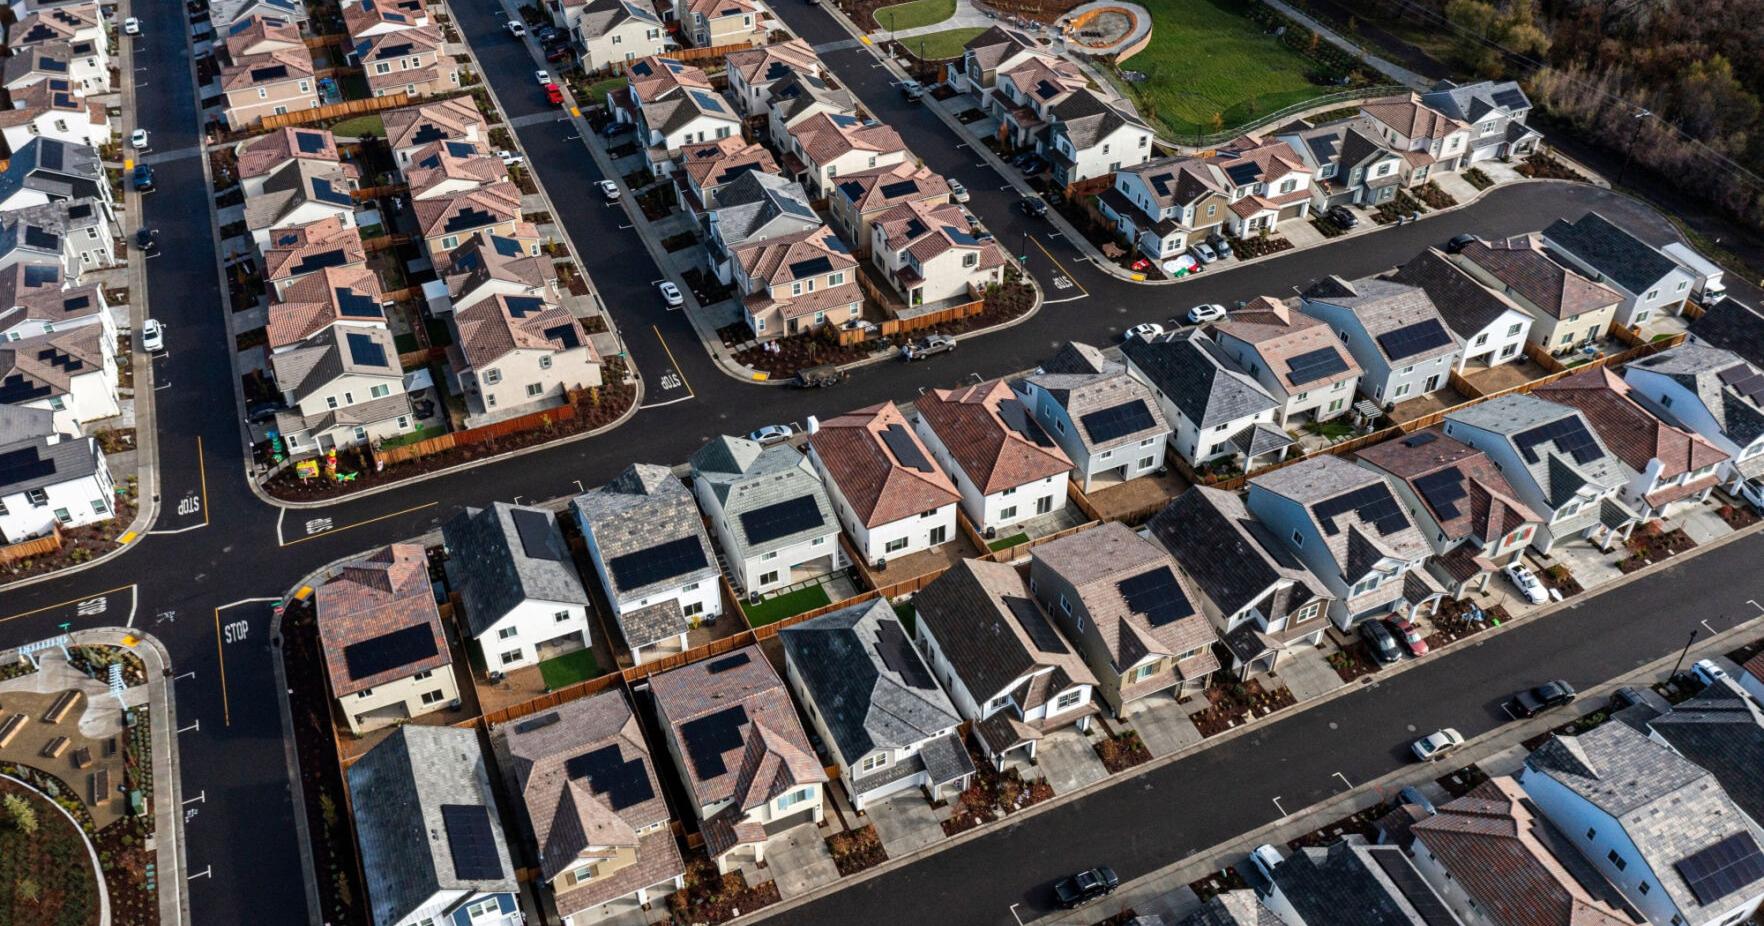 U.S. home prices climb as tighter market collides with demand